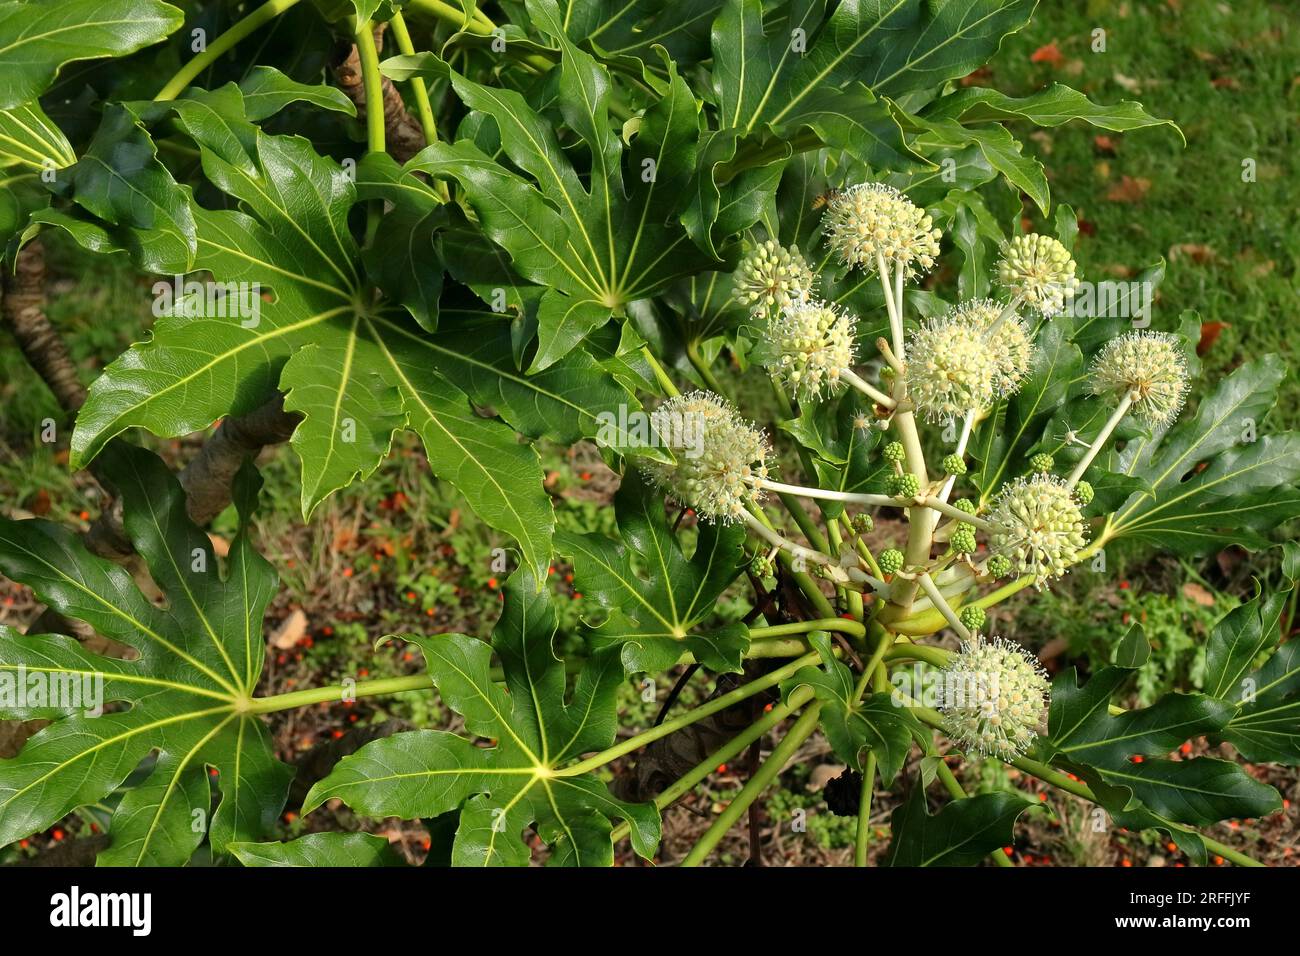 Fatsia Japonica flower heads in partial bloom. With glossy green leaves and grass and earth in the background. Stock Photo